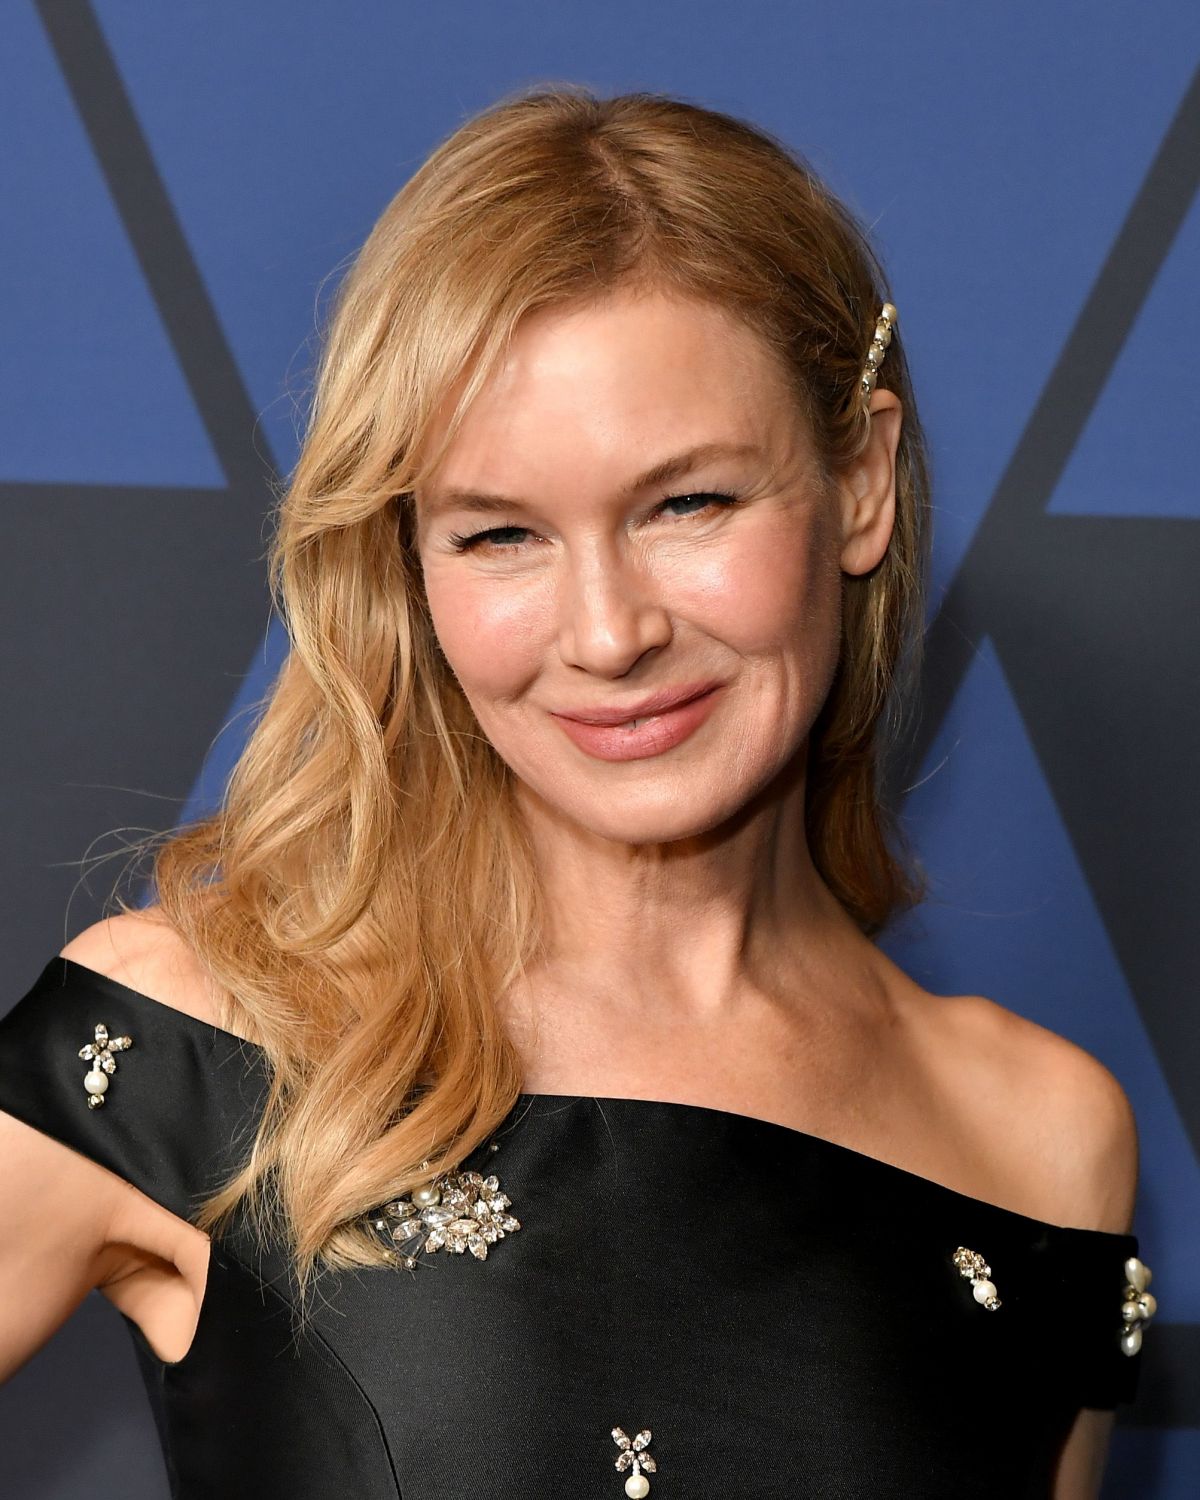 RENEE ZELLWEGER at AMPAS 11th Annual Governors Awards in 